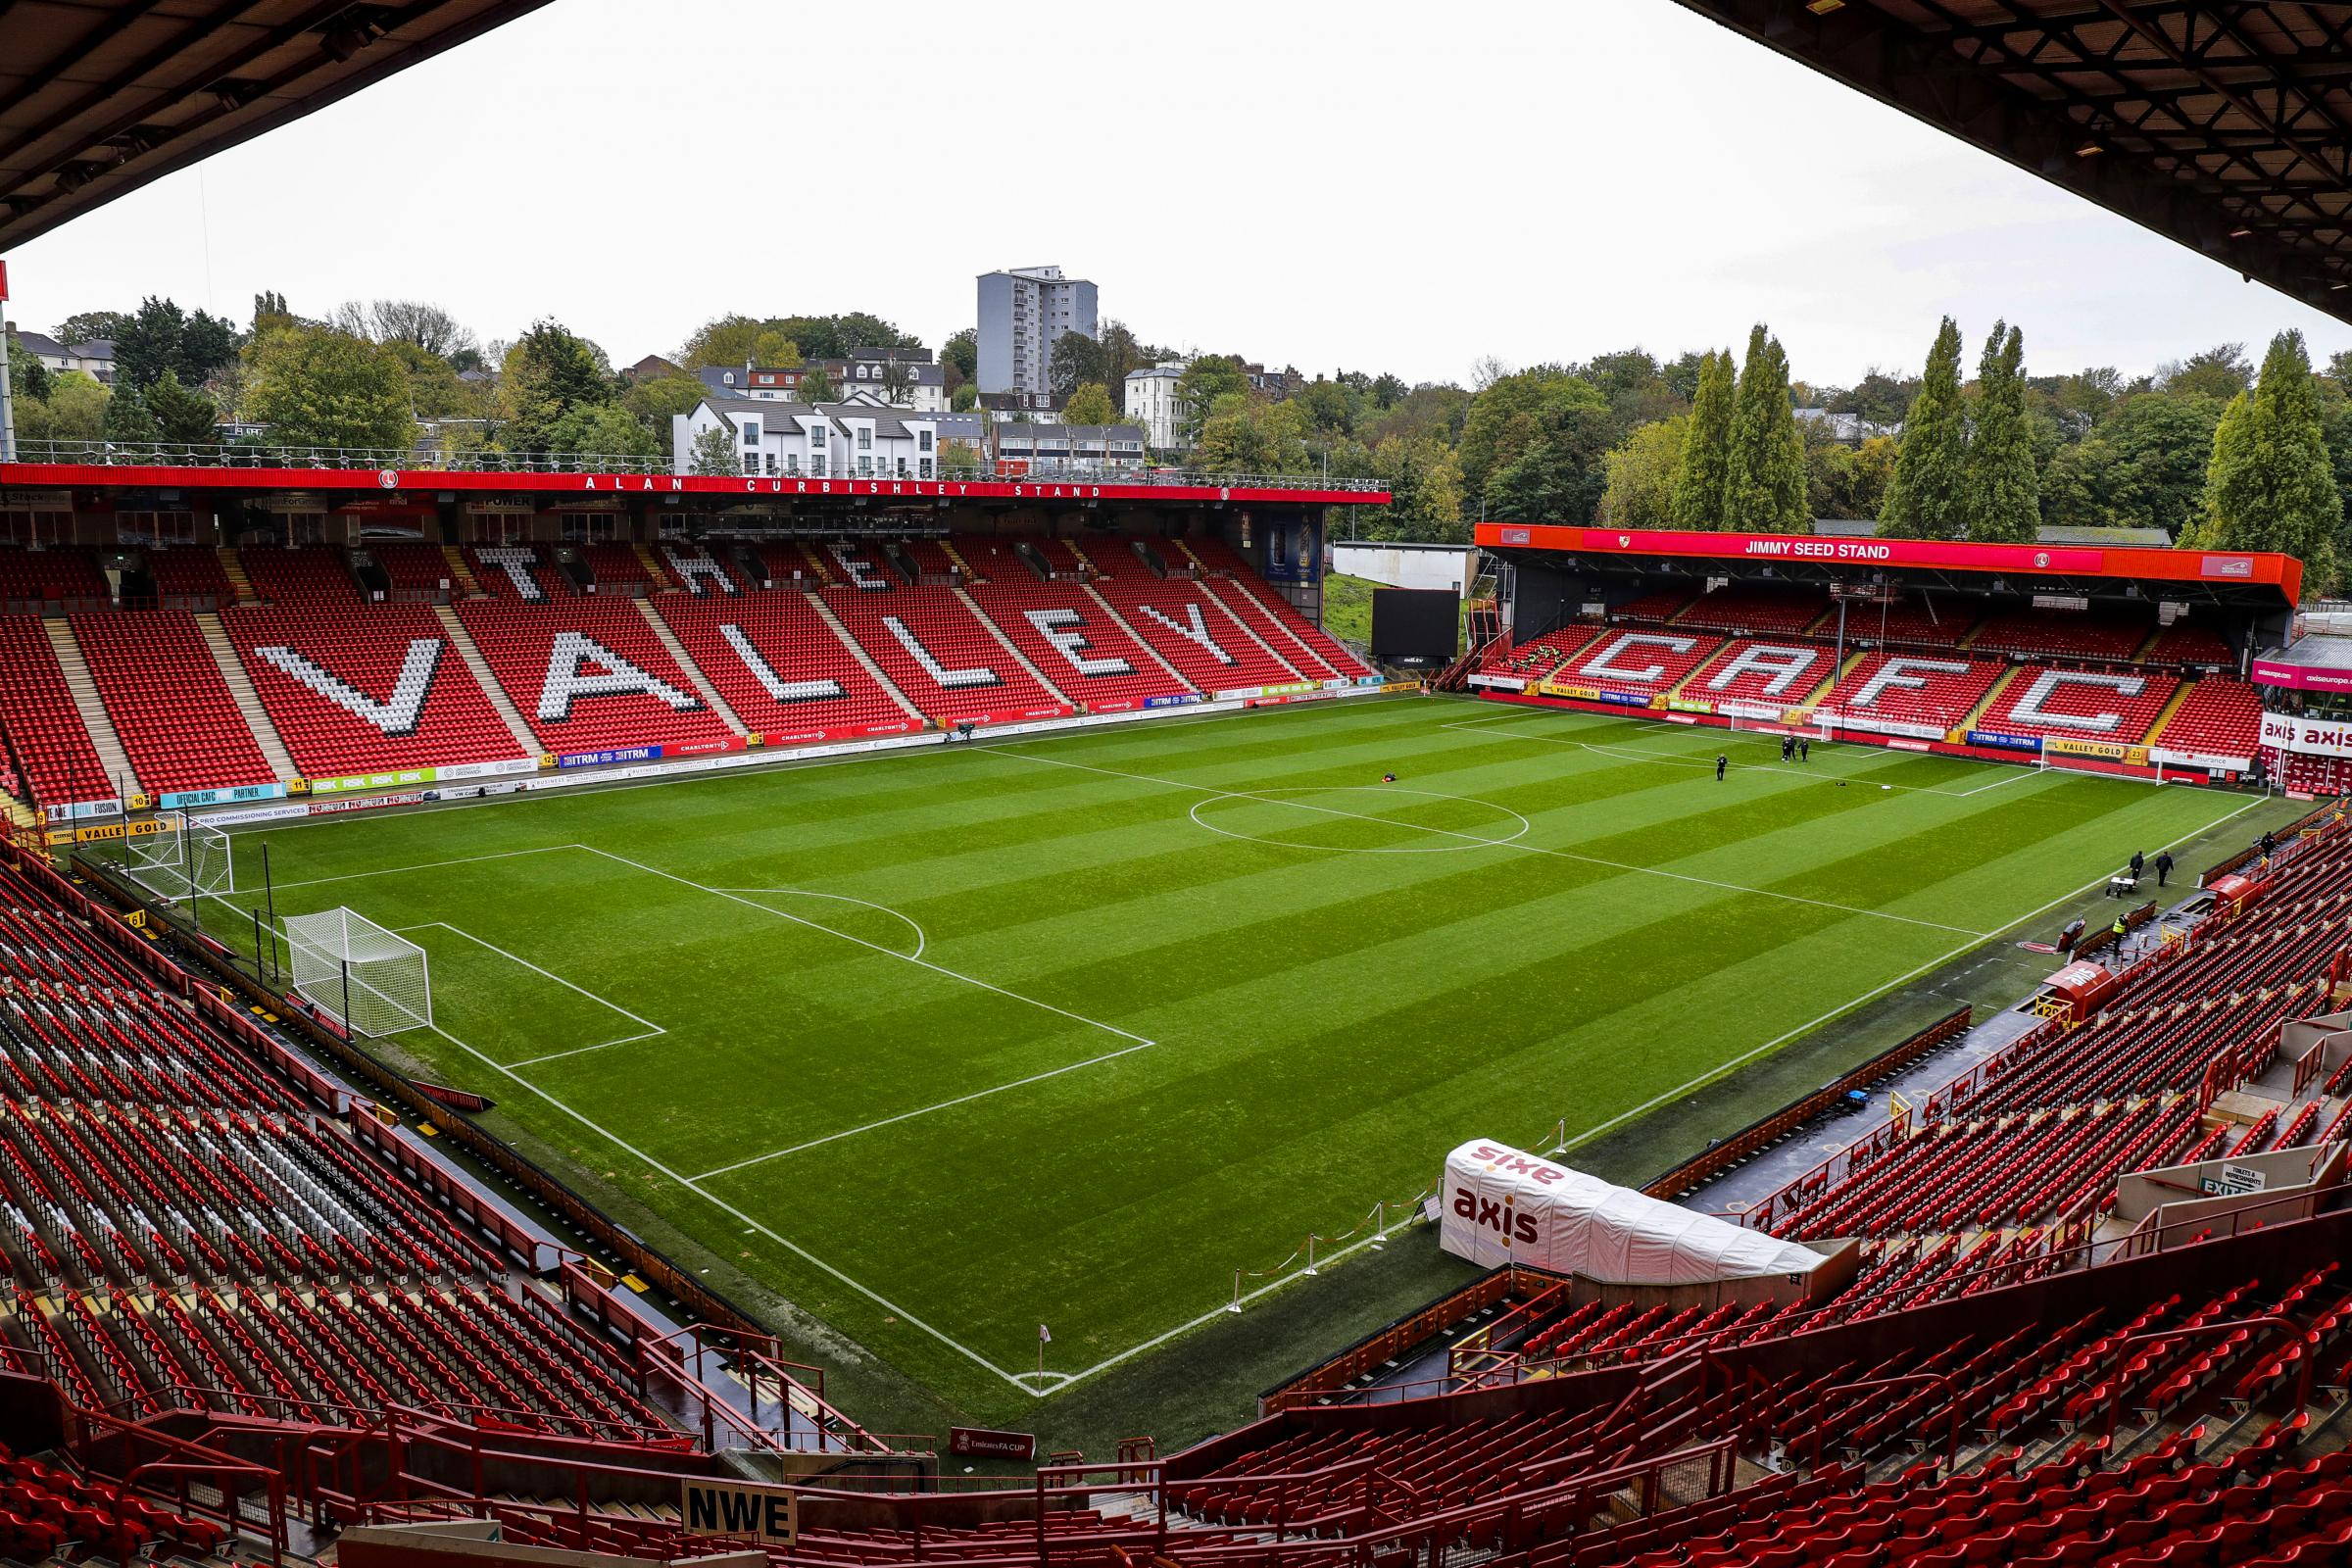 Charlton Athletic v Bolton Wanderers: How to watch on TV, live stream